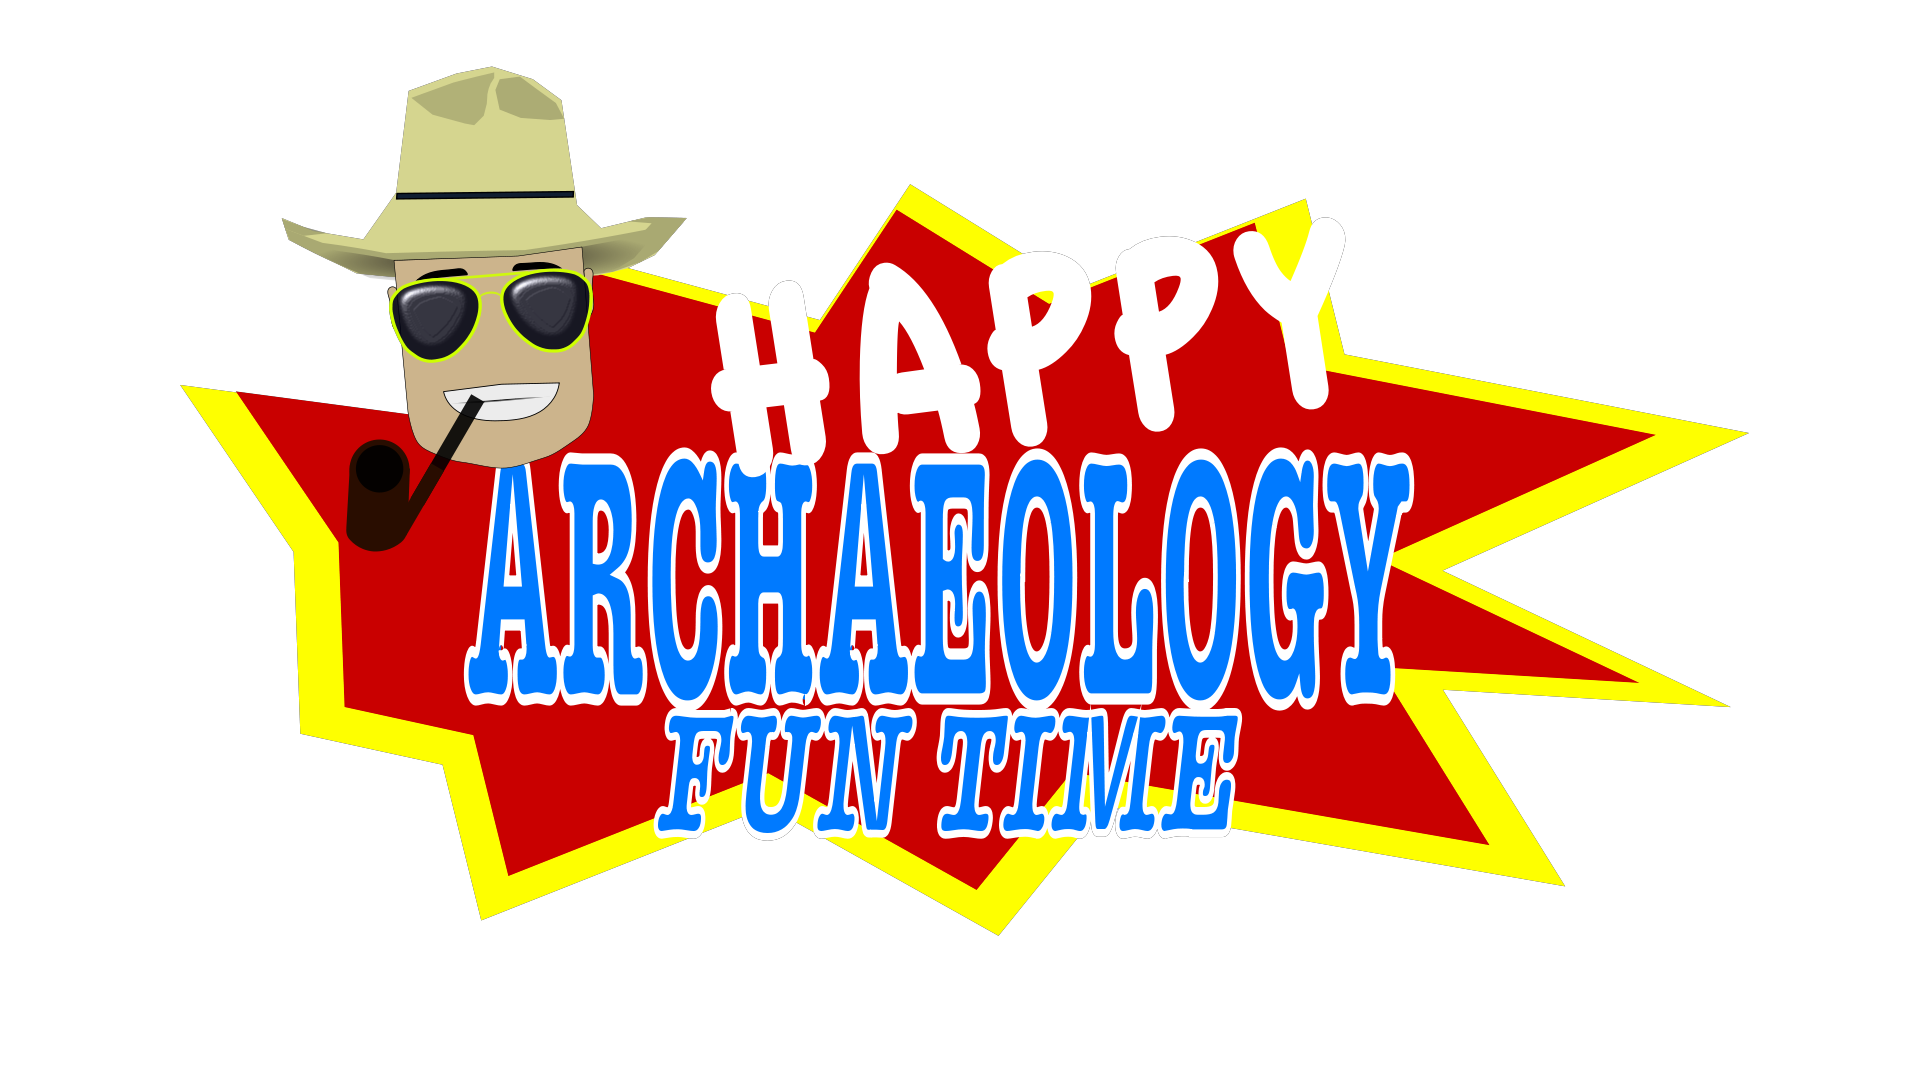 Happy Archaeology Fun Time